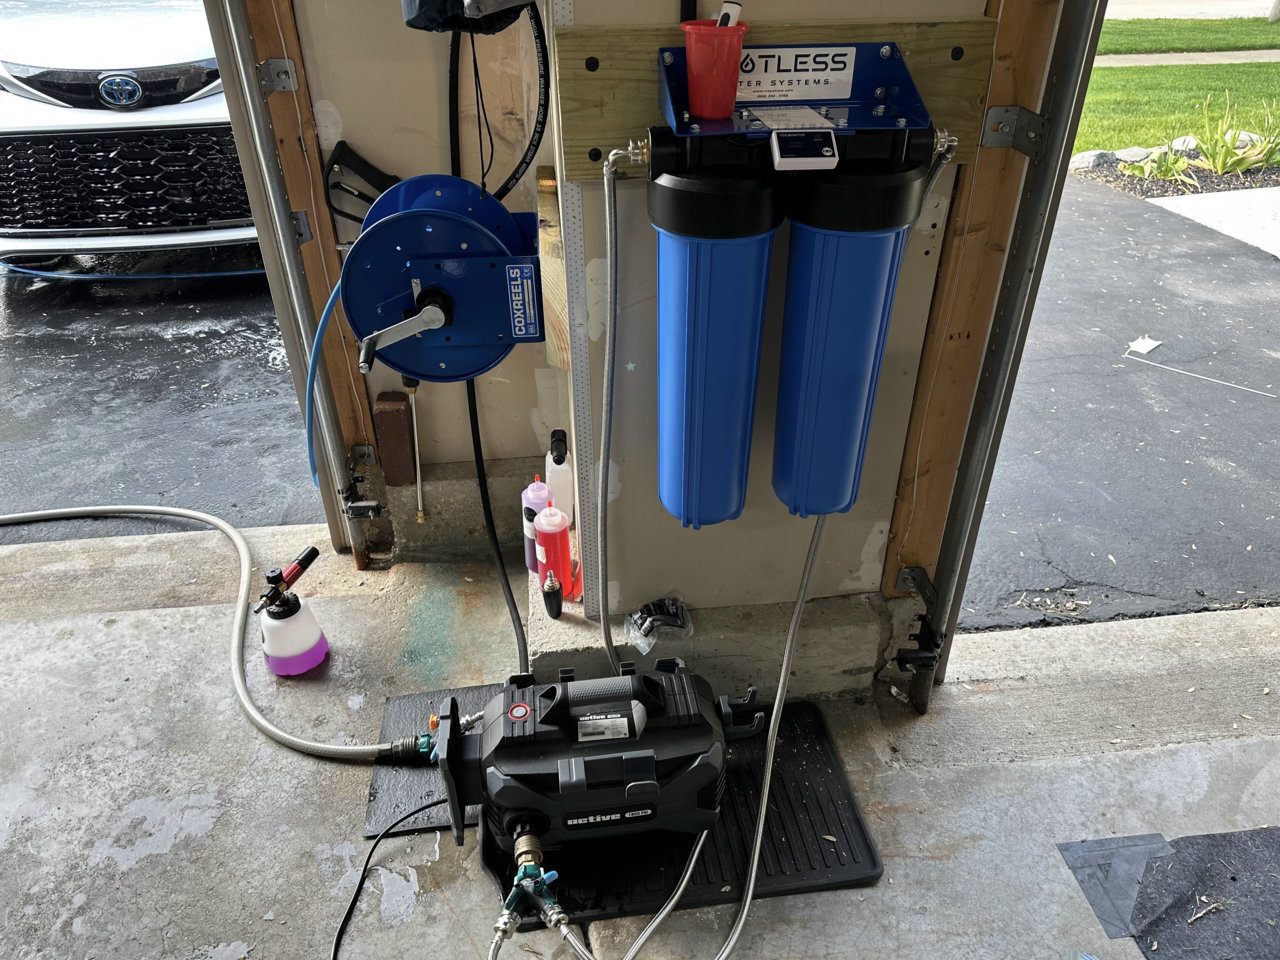 CR Spotless Water Systems - DIC-20 Simplest RV & Car Wash System, Rinse Works for All Vehicles, Motorcycles, Bikes, Boats, Planes, Yachts, Deionized